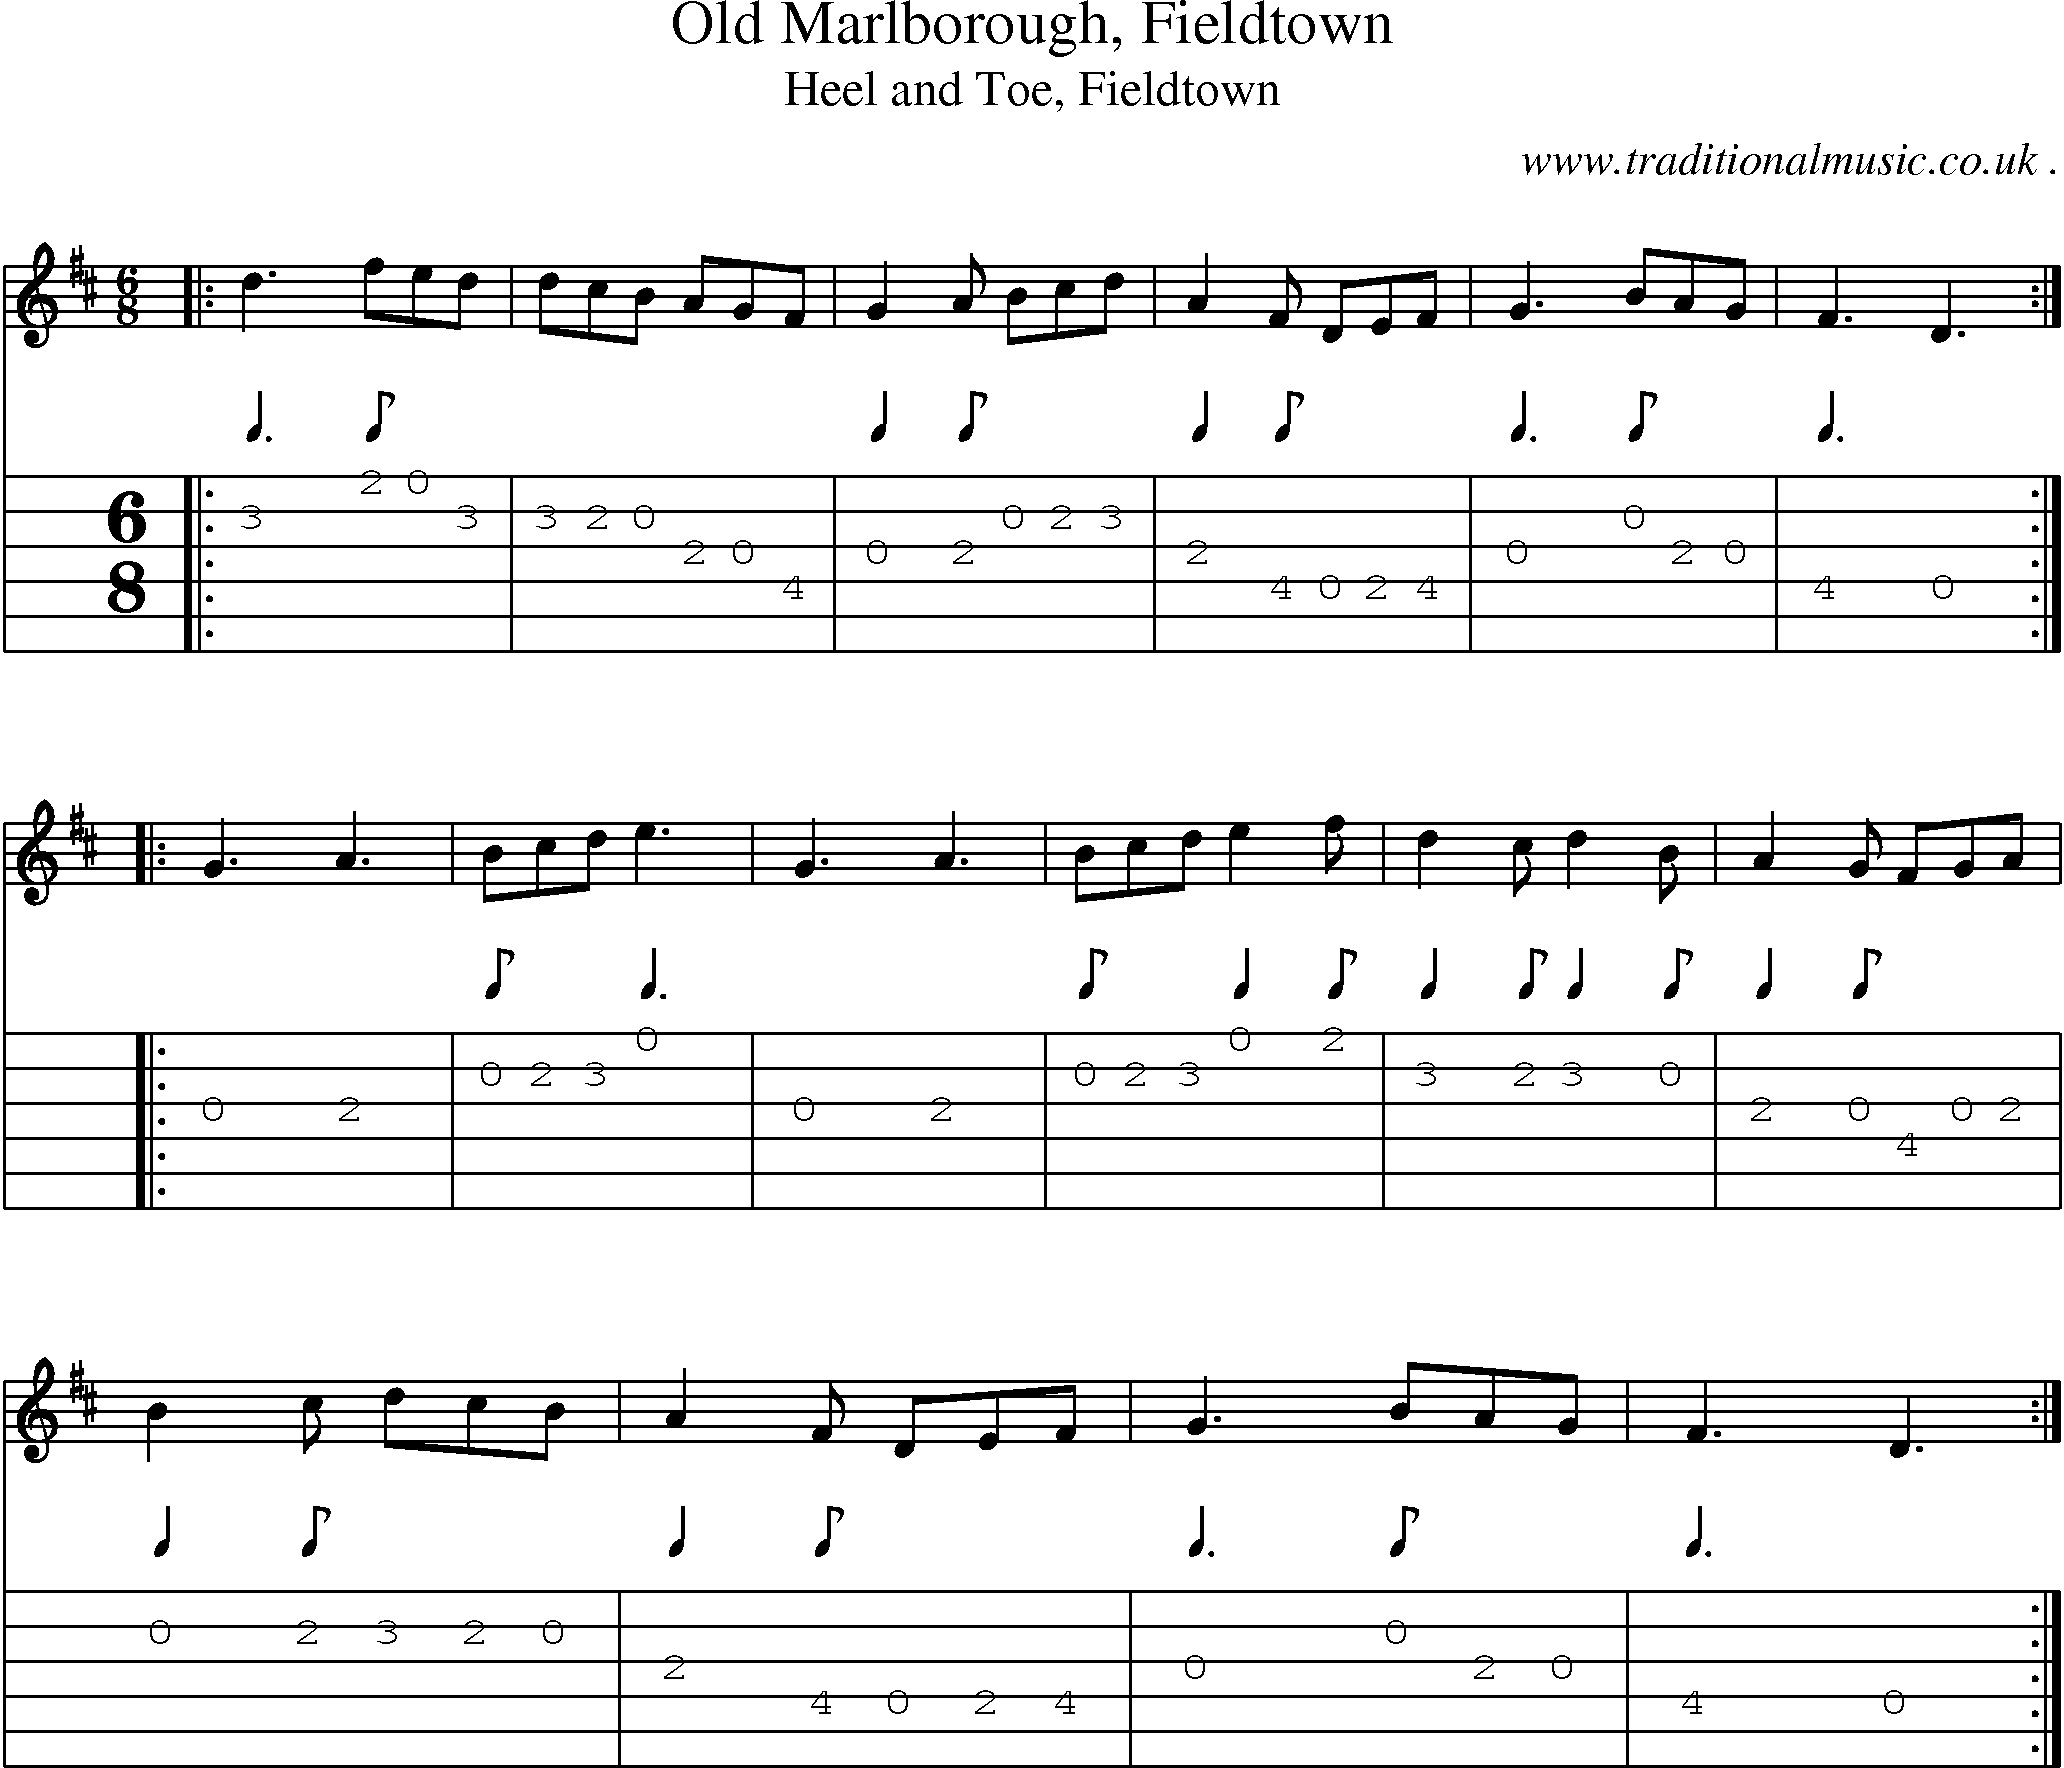 Sheet-Music and Guitar Tabs for Old Marlborough Fieldtown